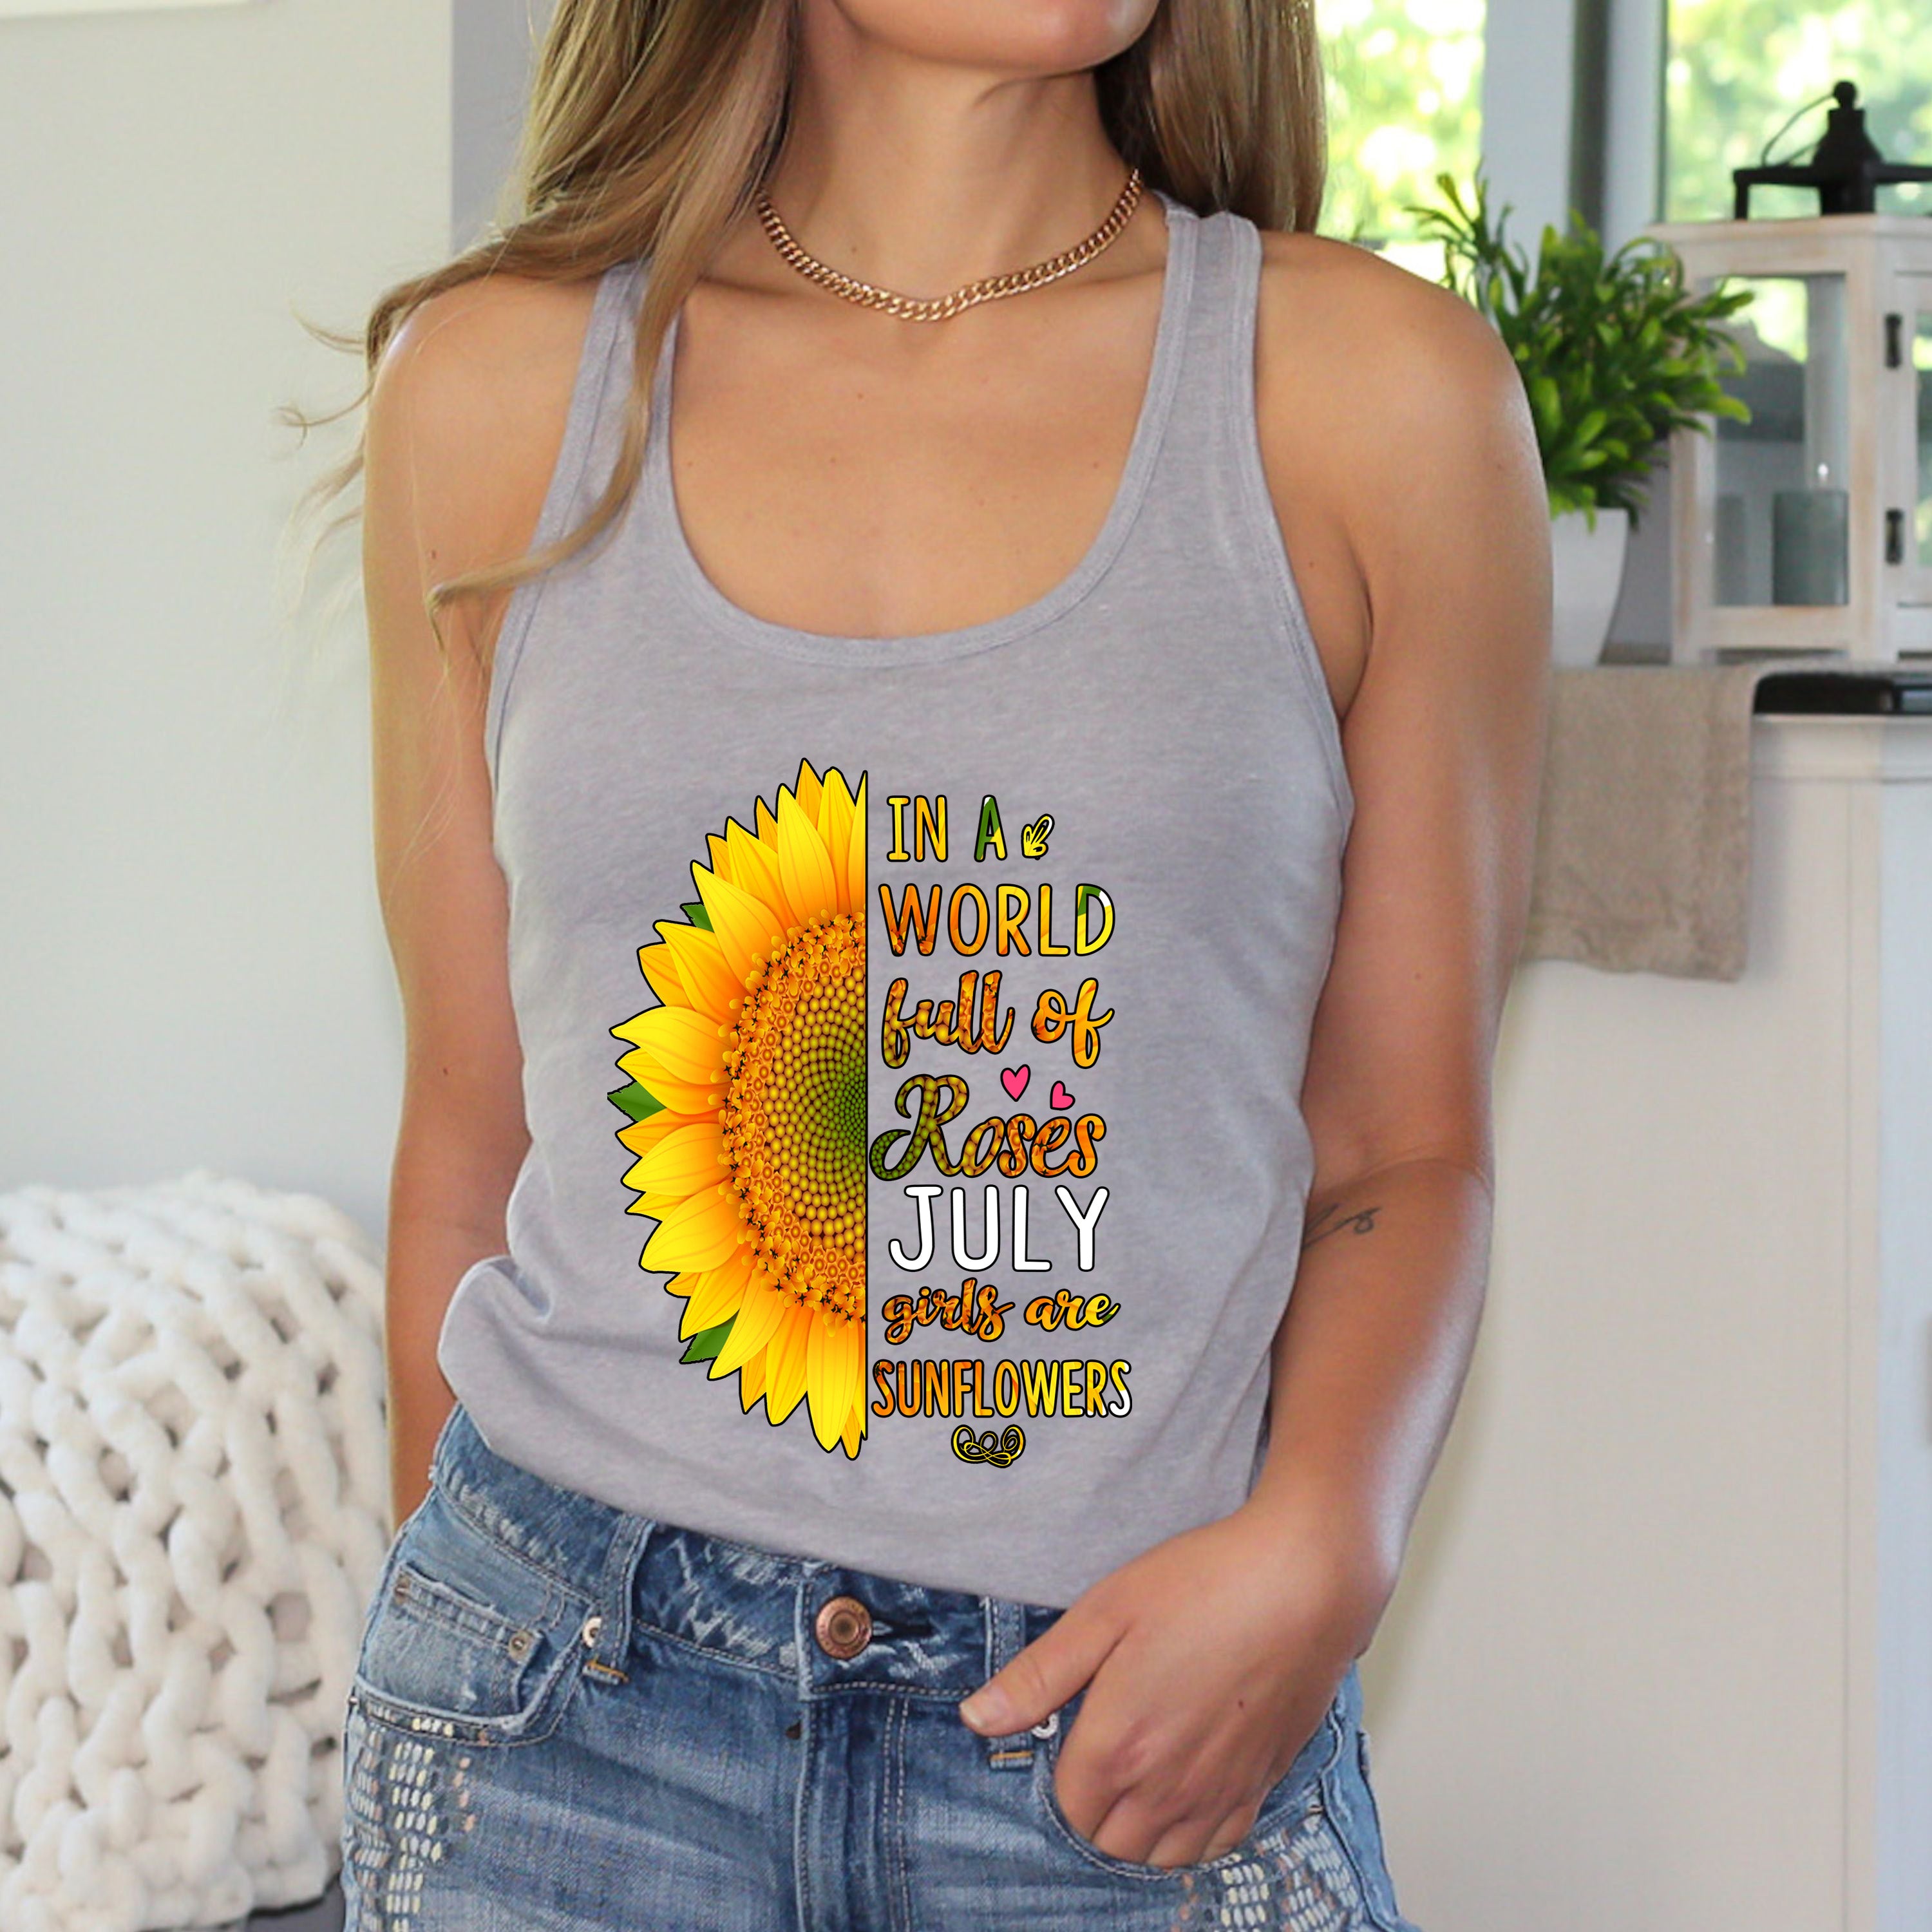 "In a world full of roses July girls are Sunflowers"